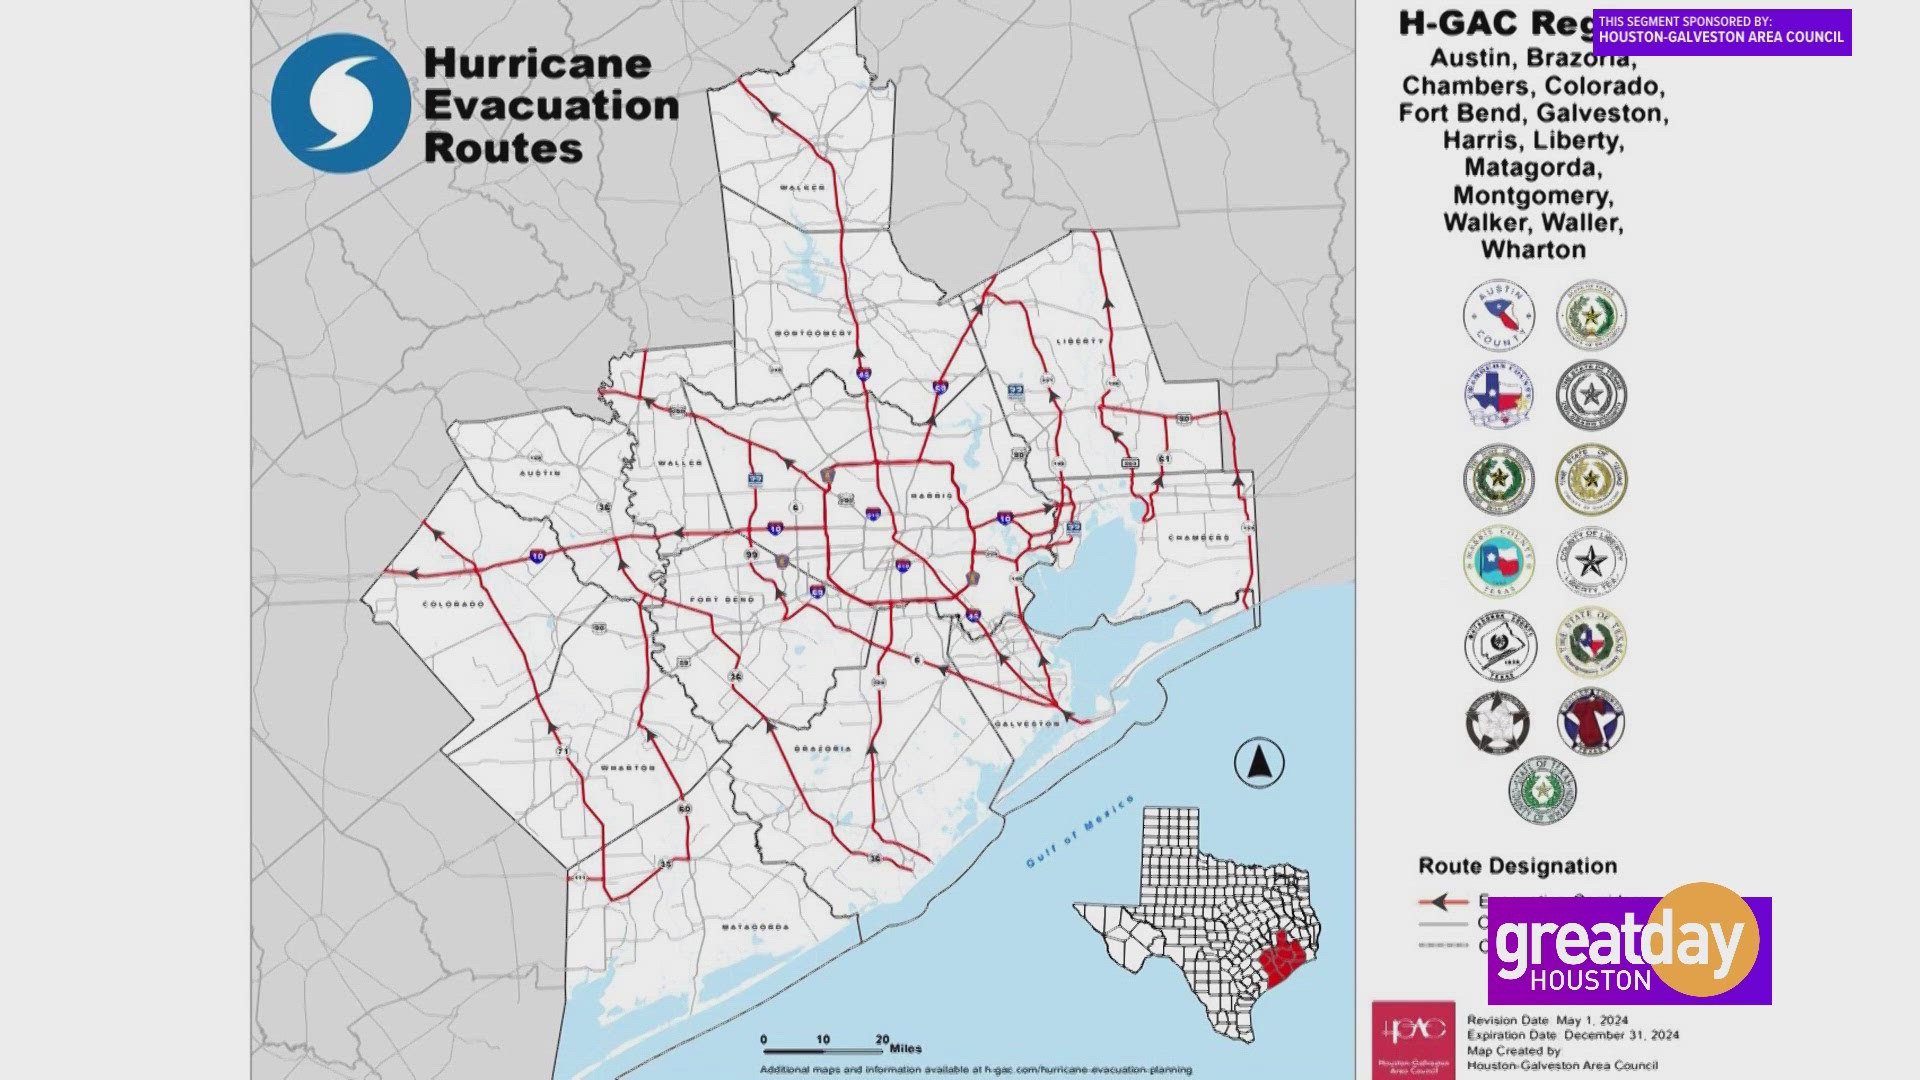 Francis Rodriguez with The Houston-Galveston Area Council explains how evacuation routes are equipped with resources to ensure safety & a quick exit.